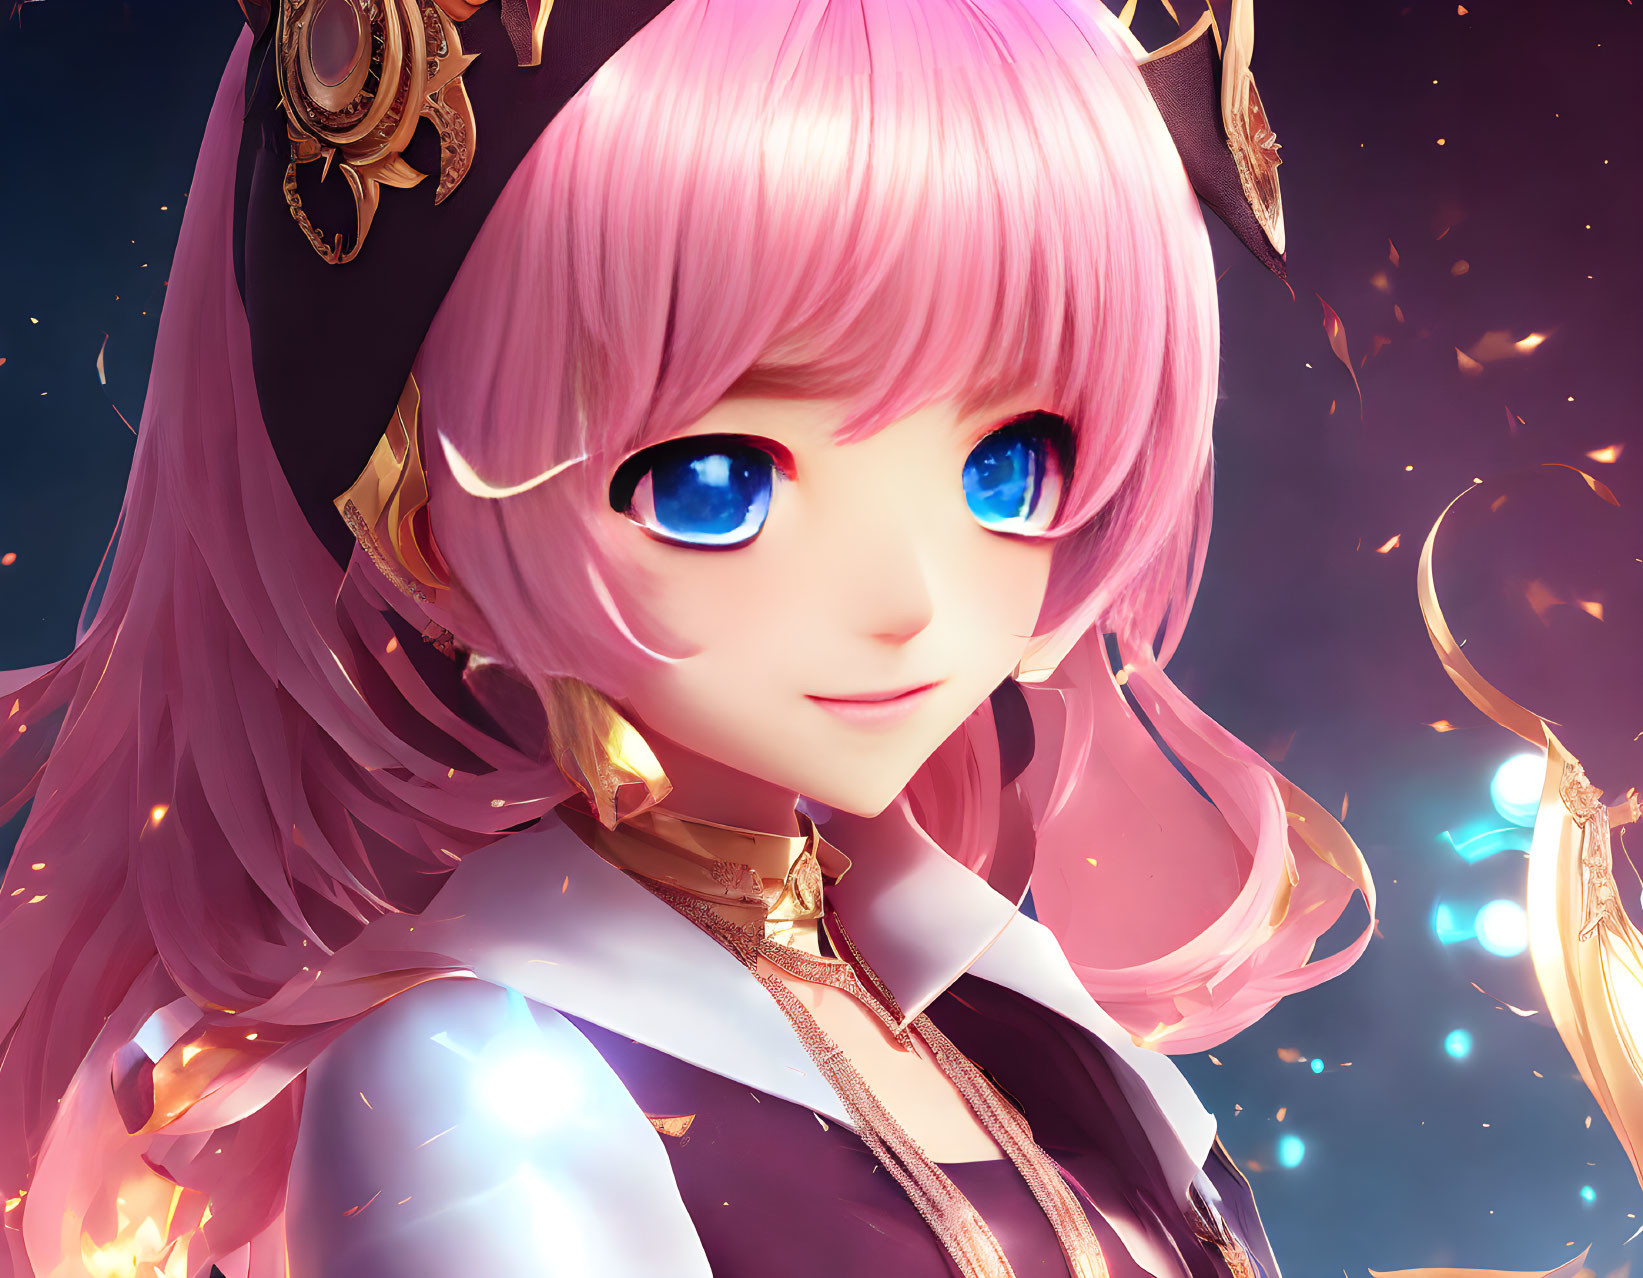 Animated character with pink hair, blue eyes, and golden adornments among glowing butterflies